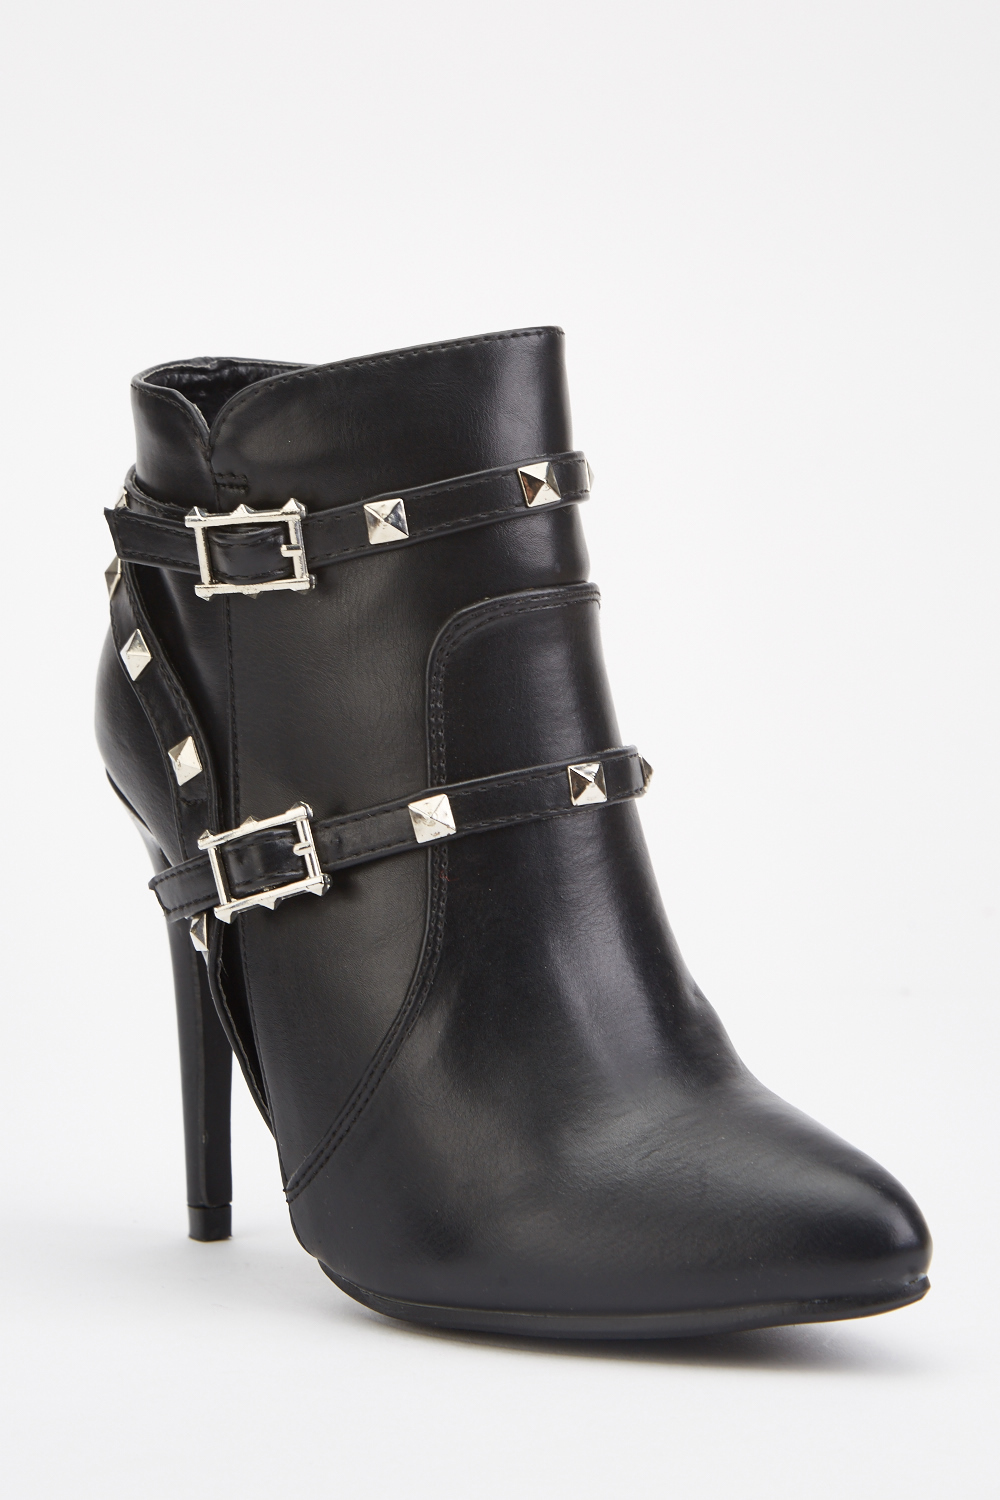 Studded Buckle Side Ankle Boots - Just $7